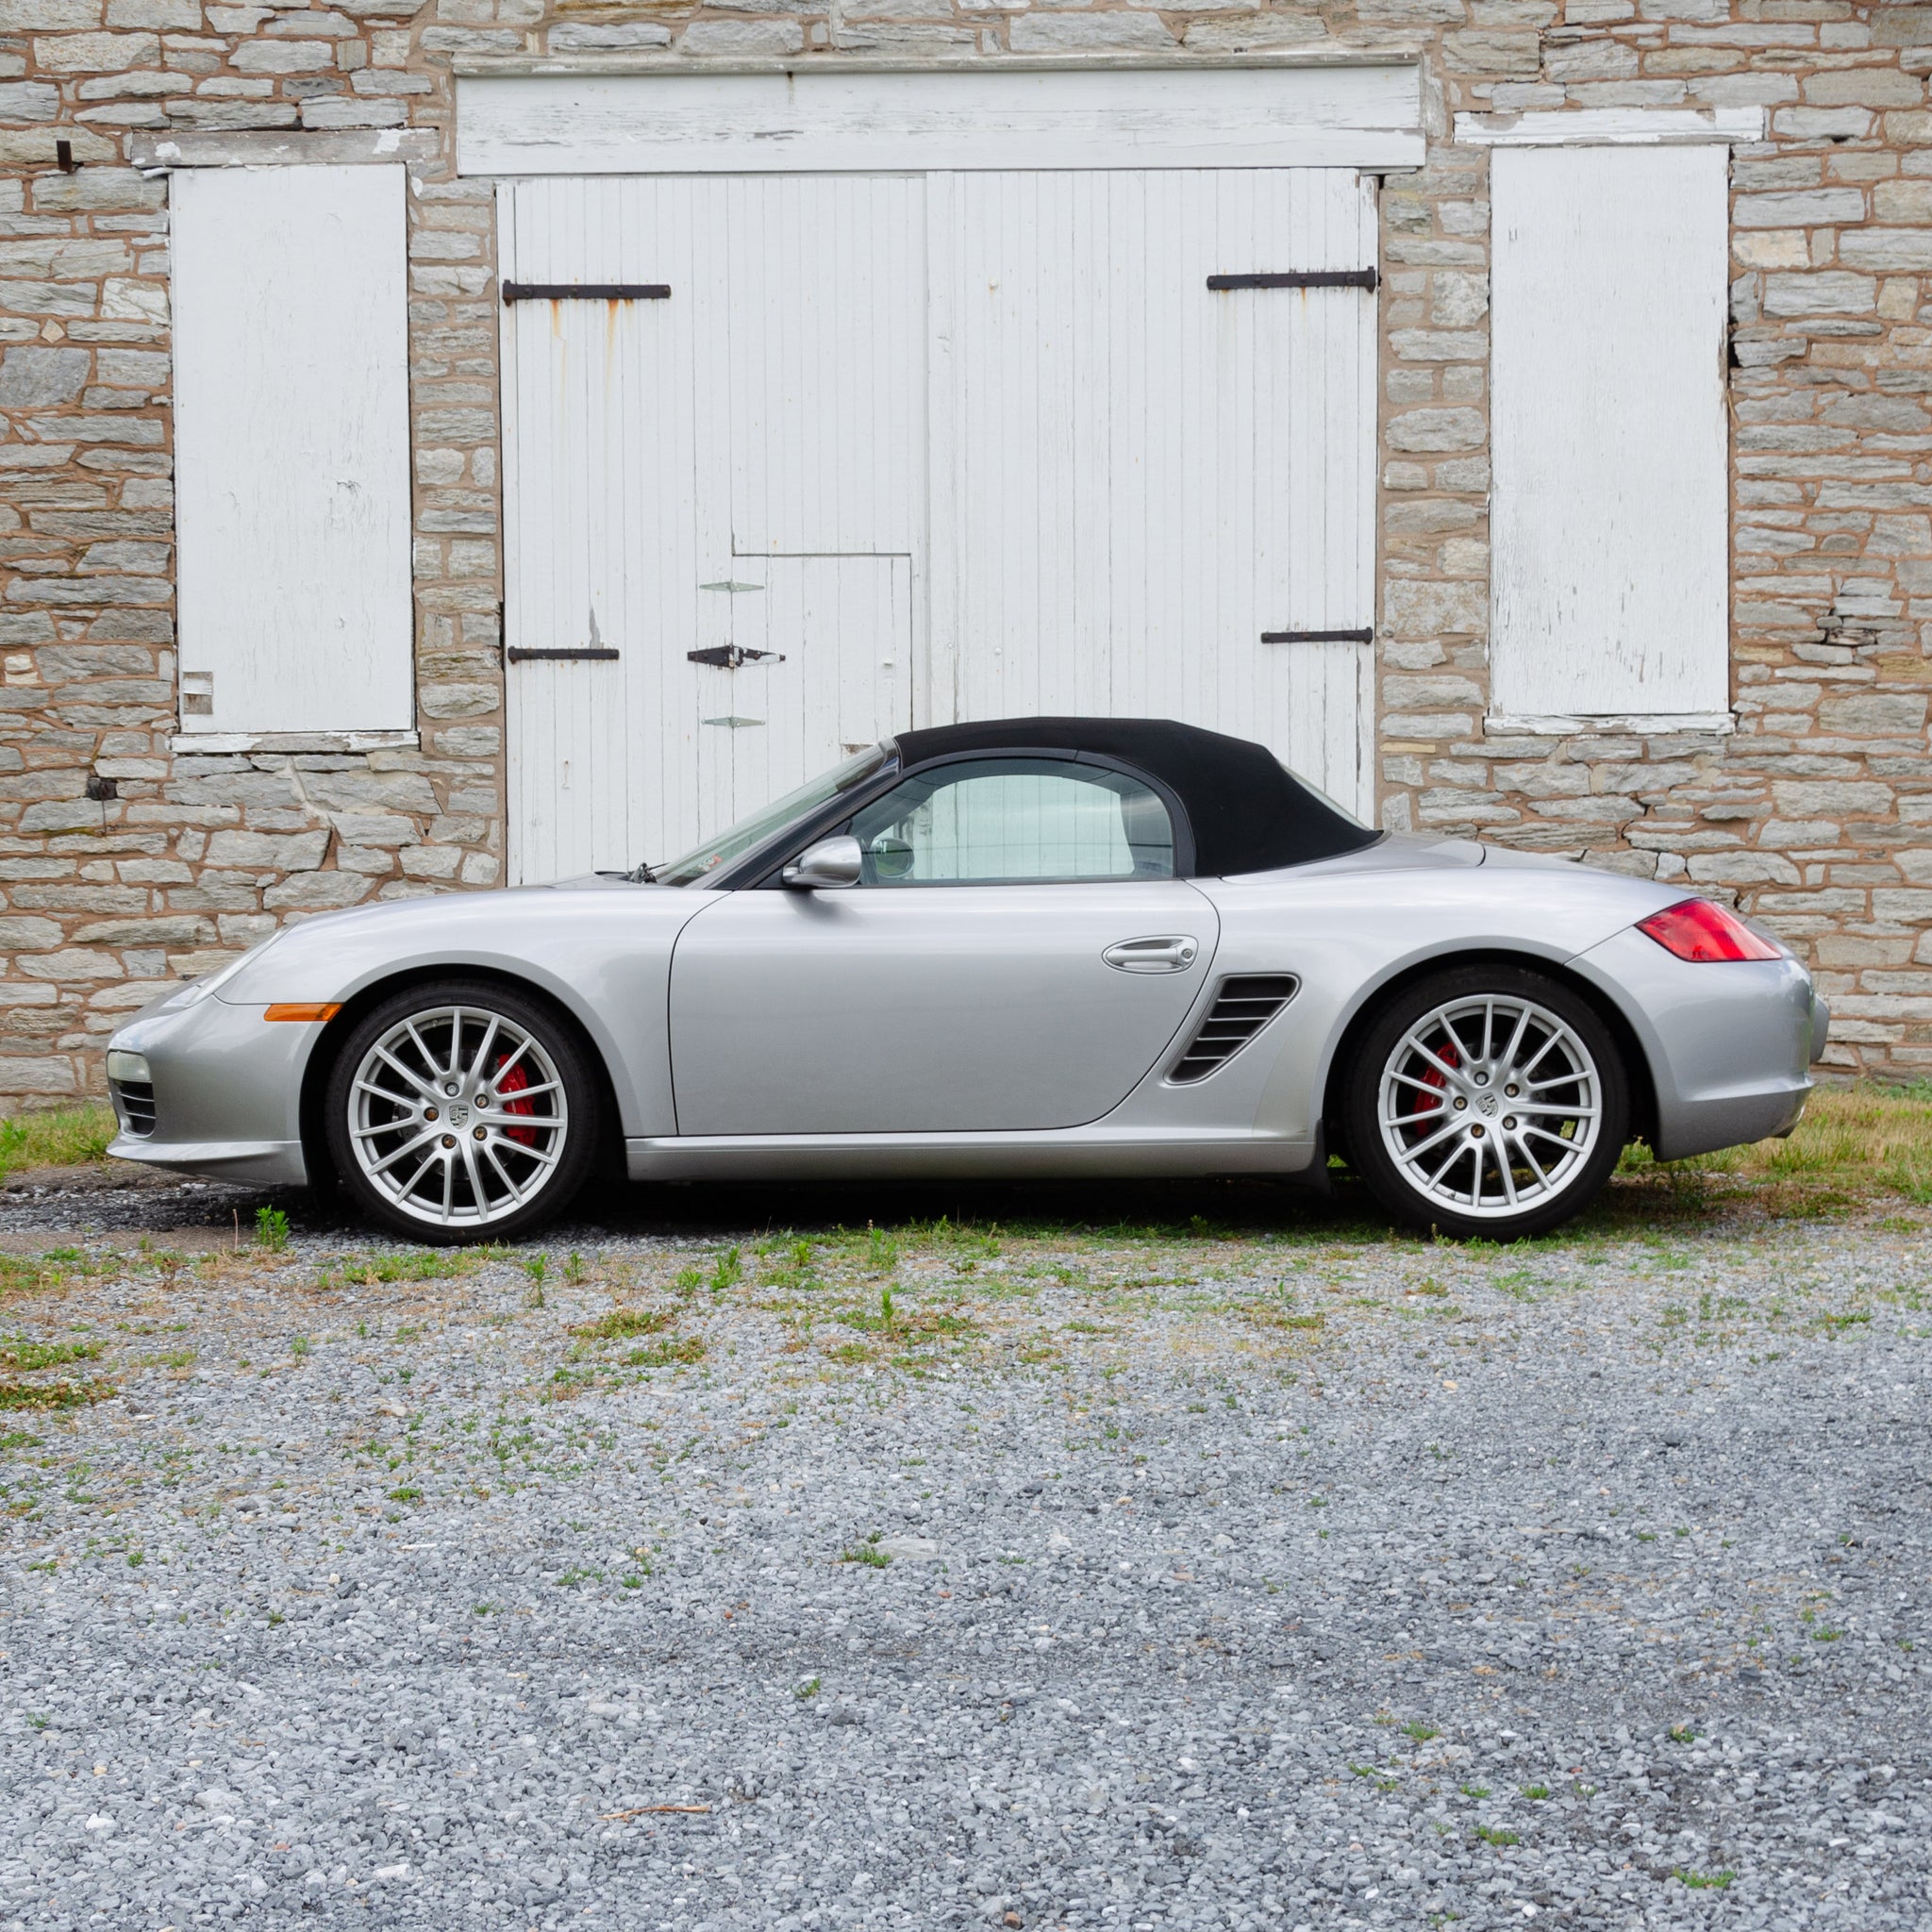 SOLD 2008 Porsche Boxster RS60 Spyder Limited Edition 900/1960 6-Speed Manual